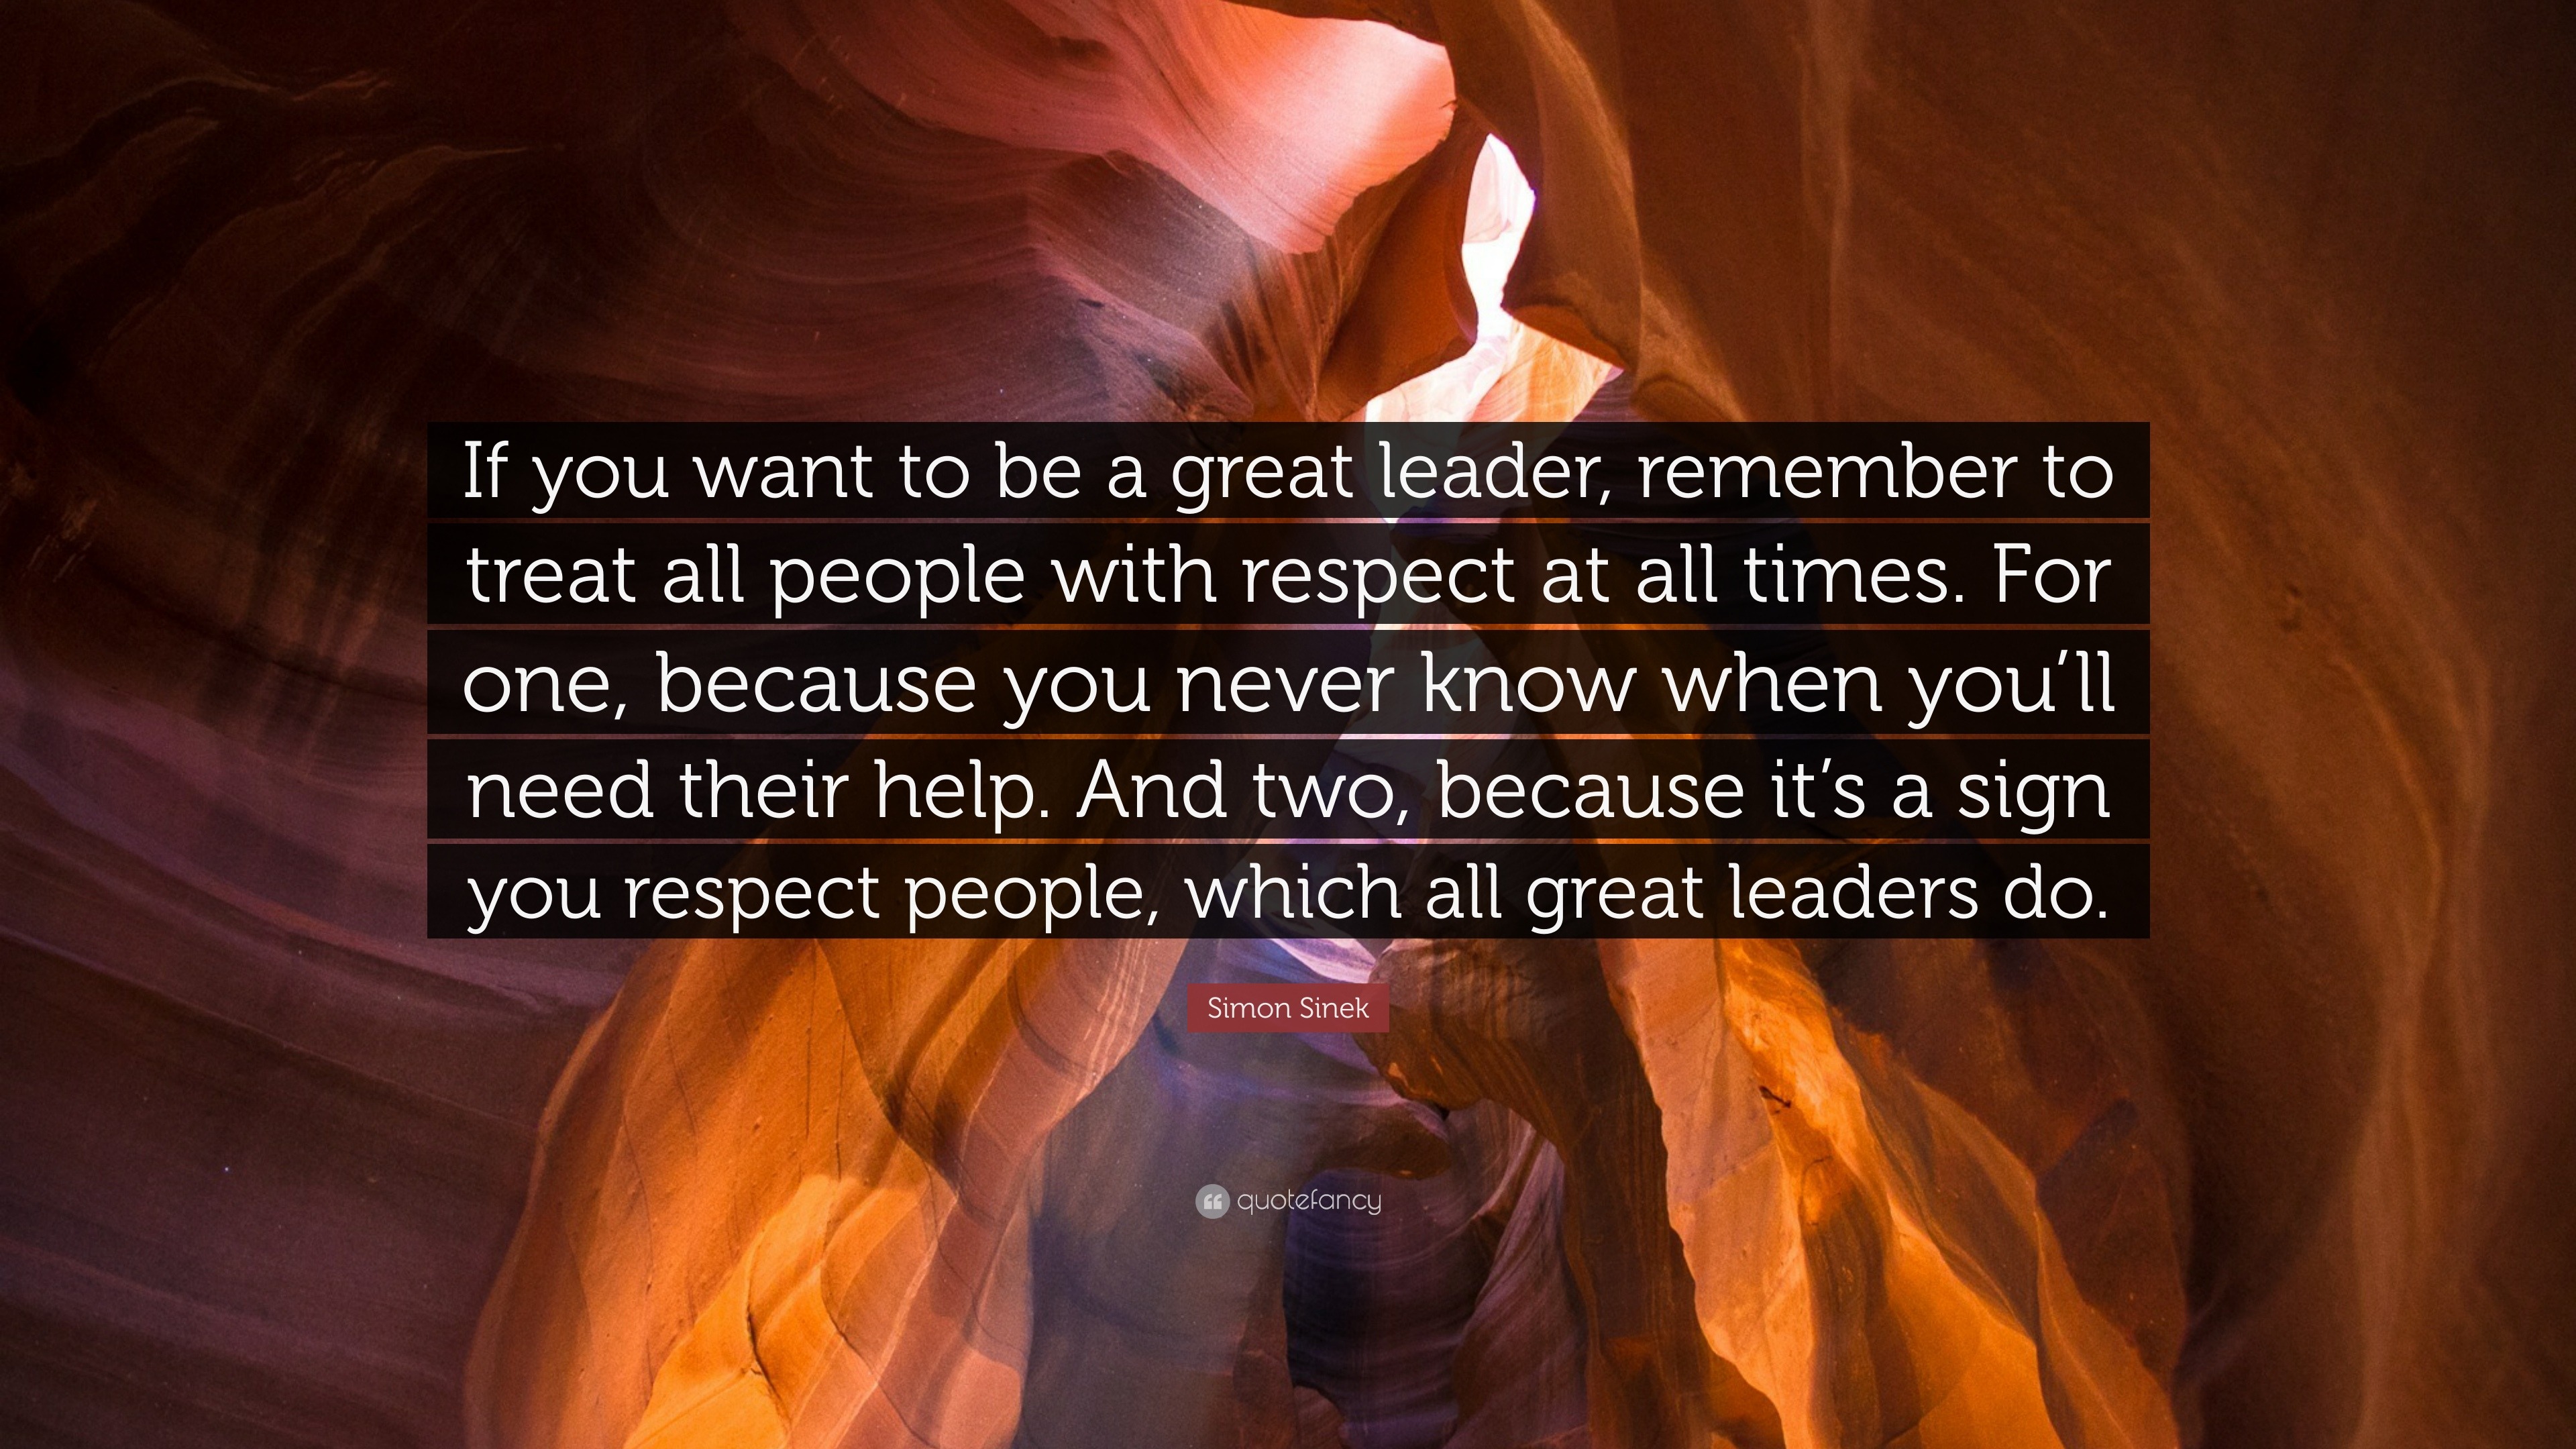 Simon Sinek Quote “If you want to be a great leader